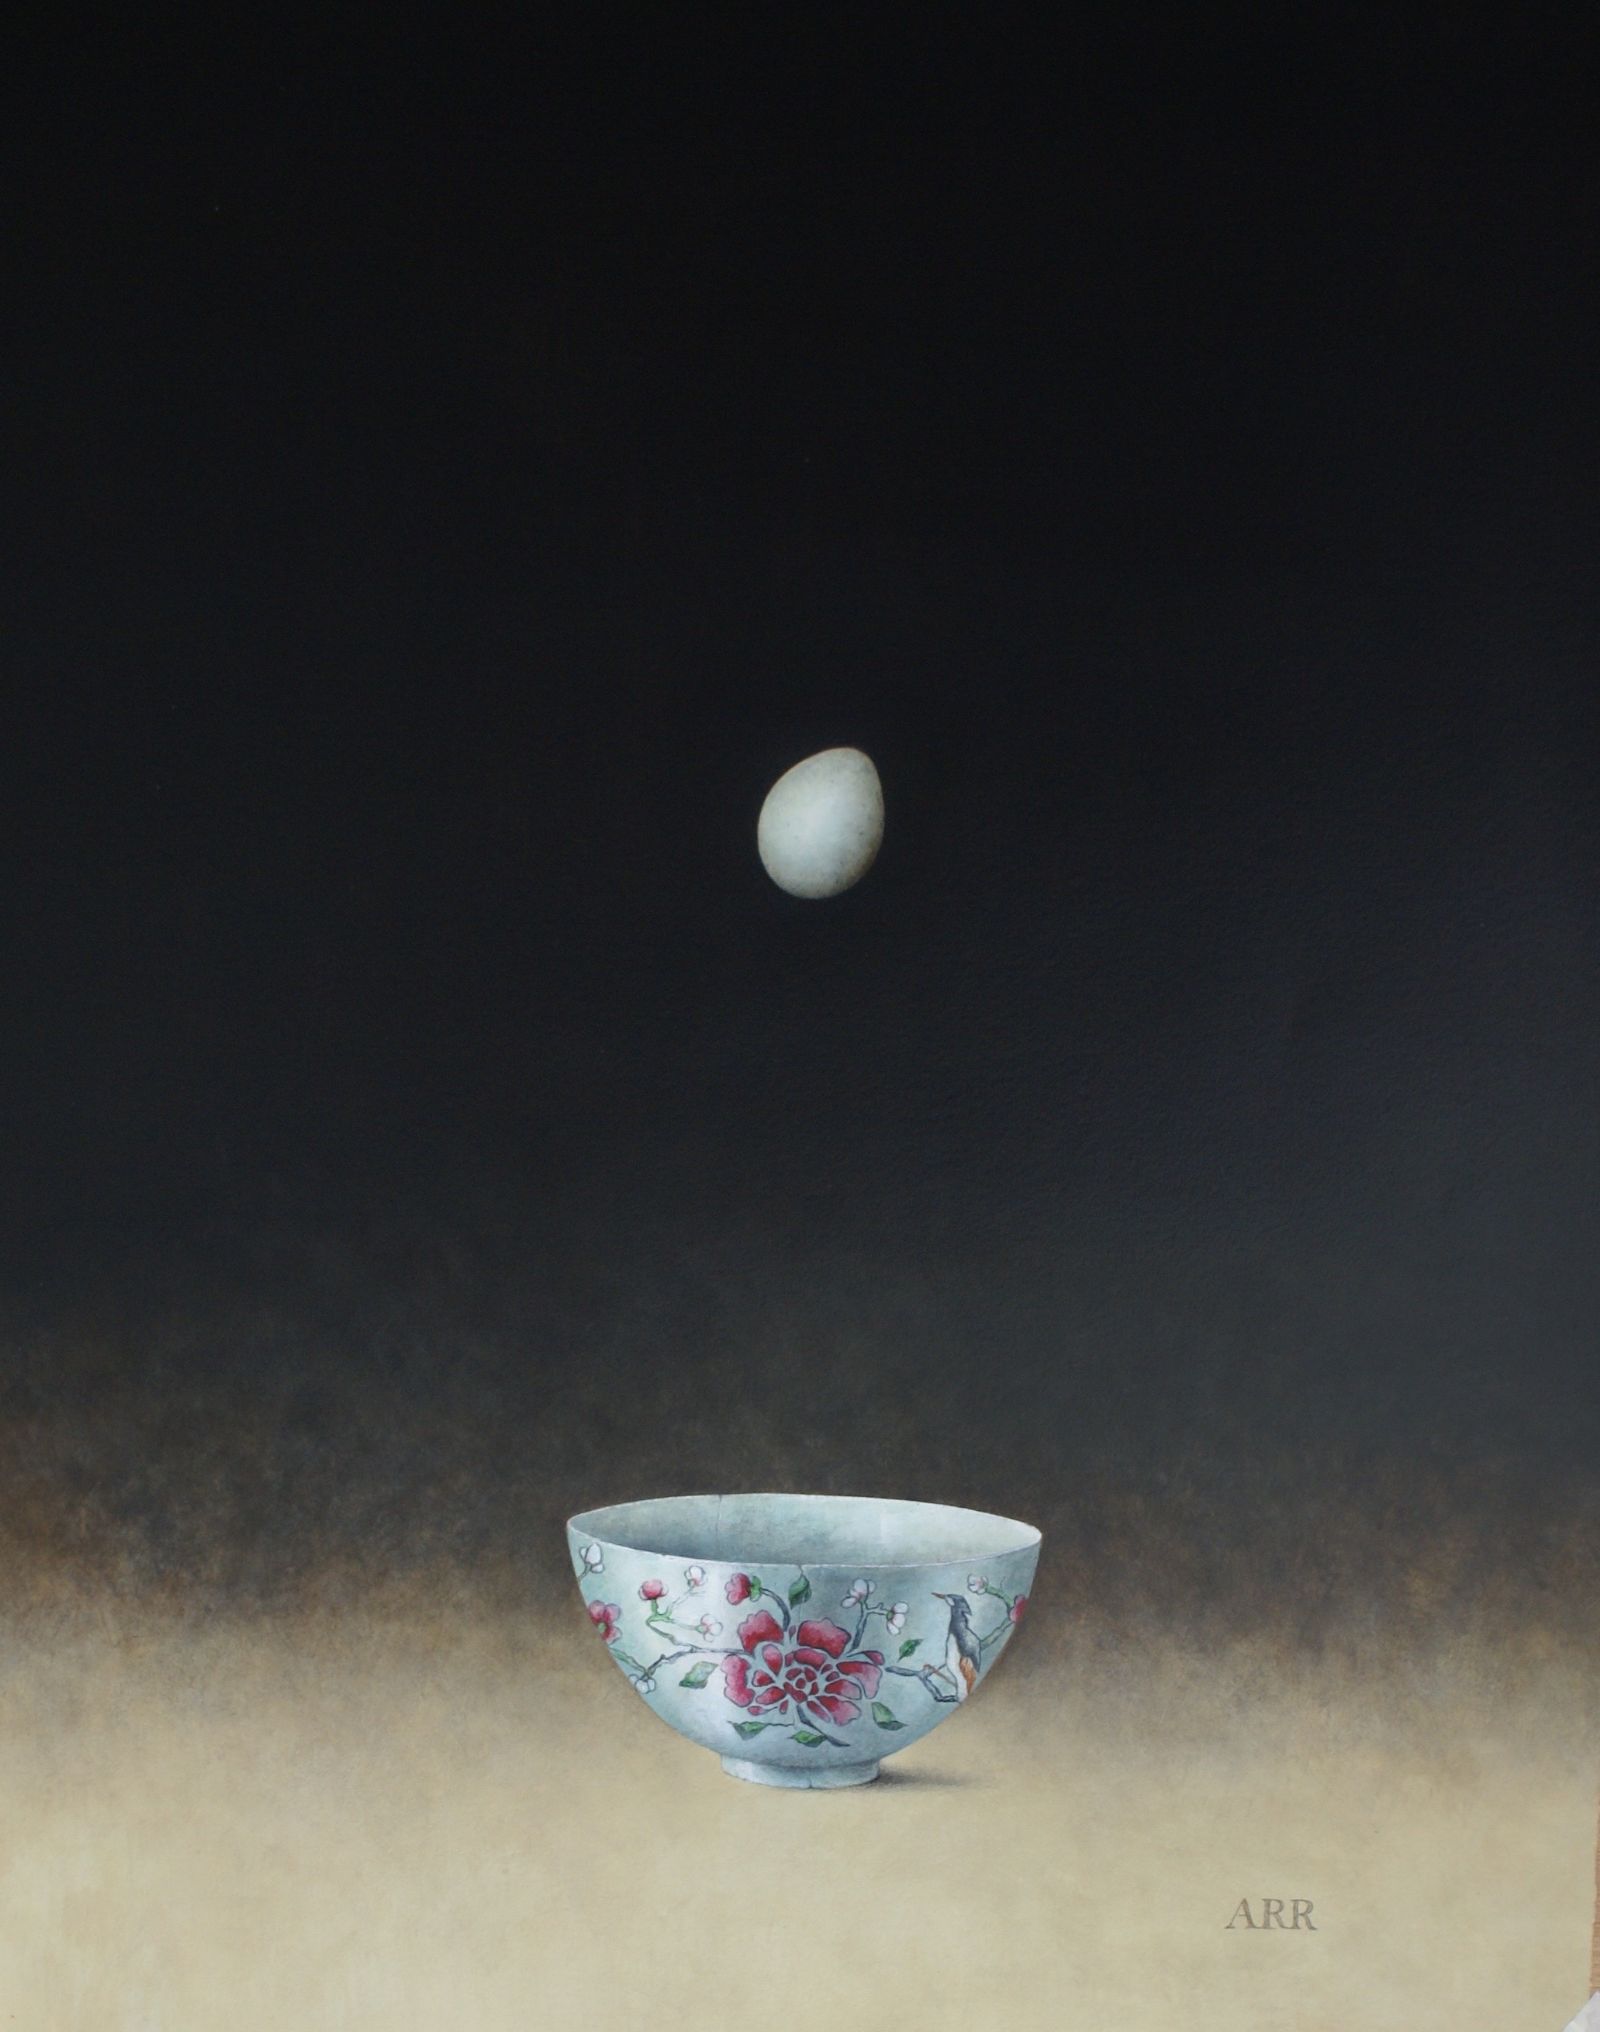 Rose Bowl with Falling Egg by Alison Rankin